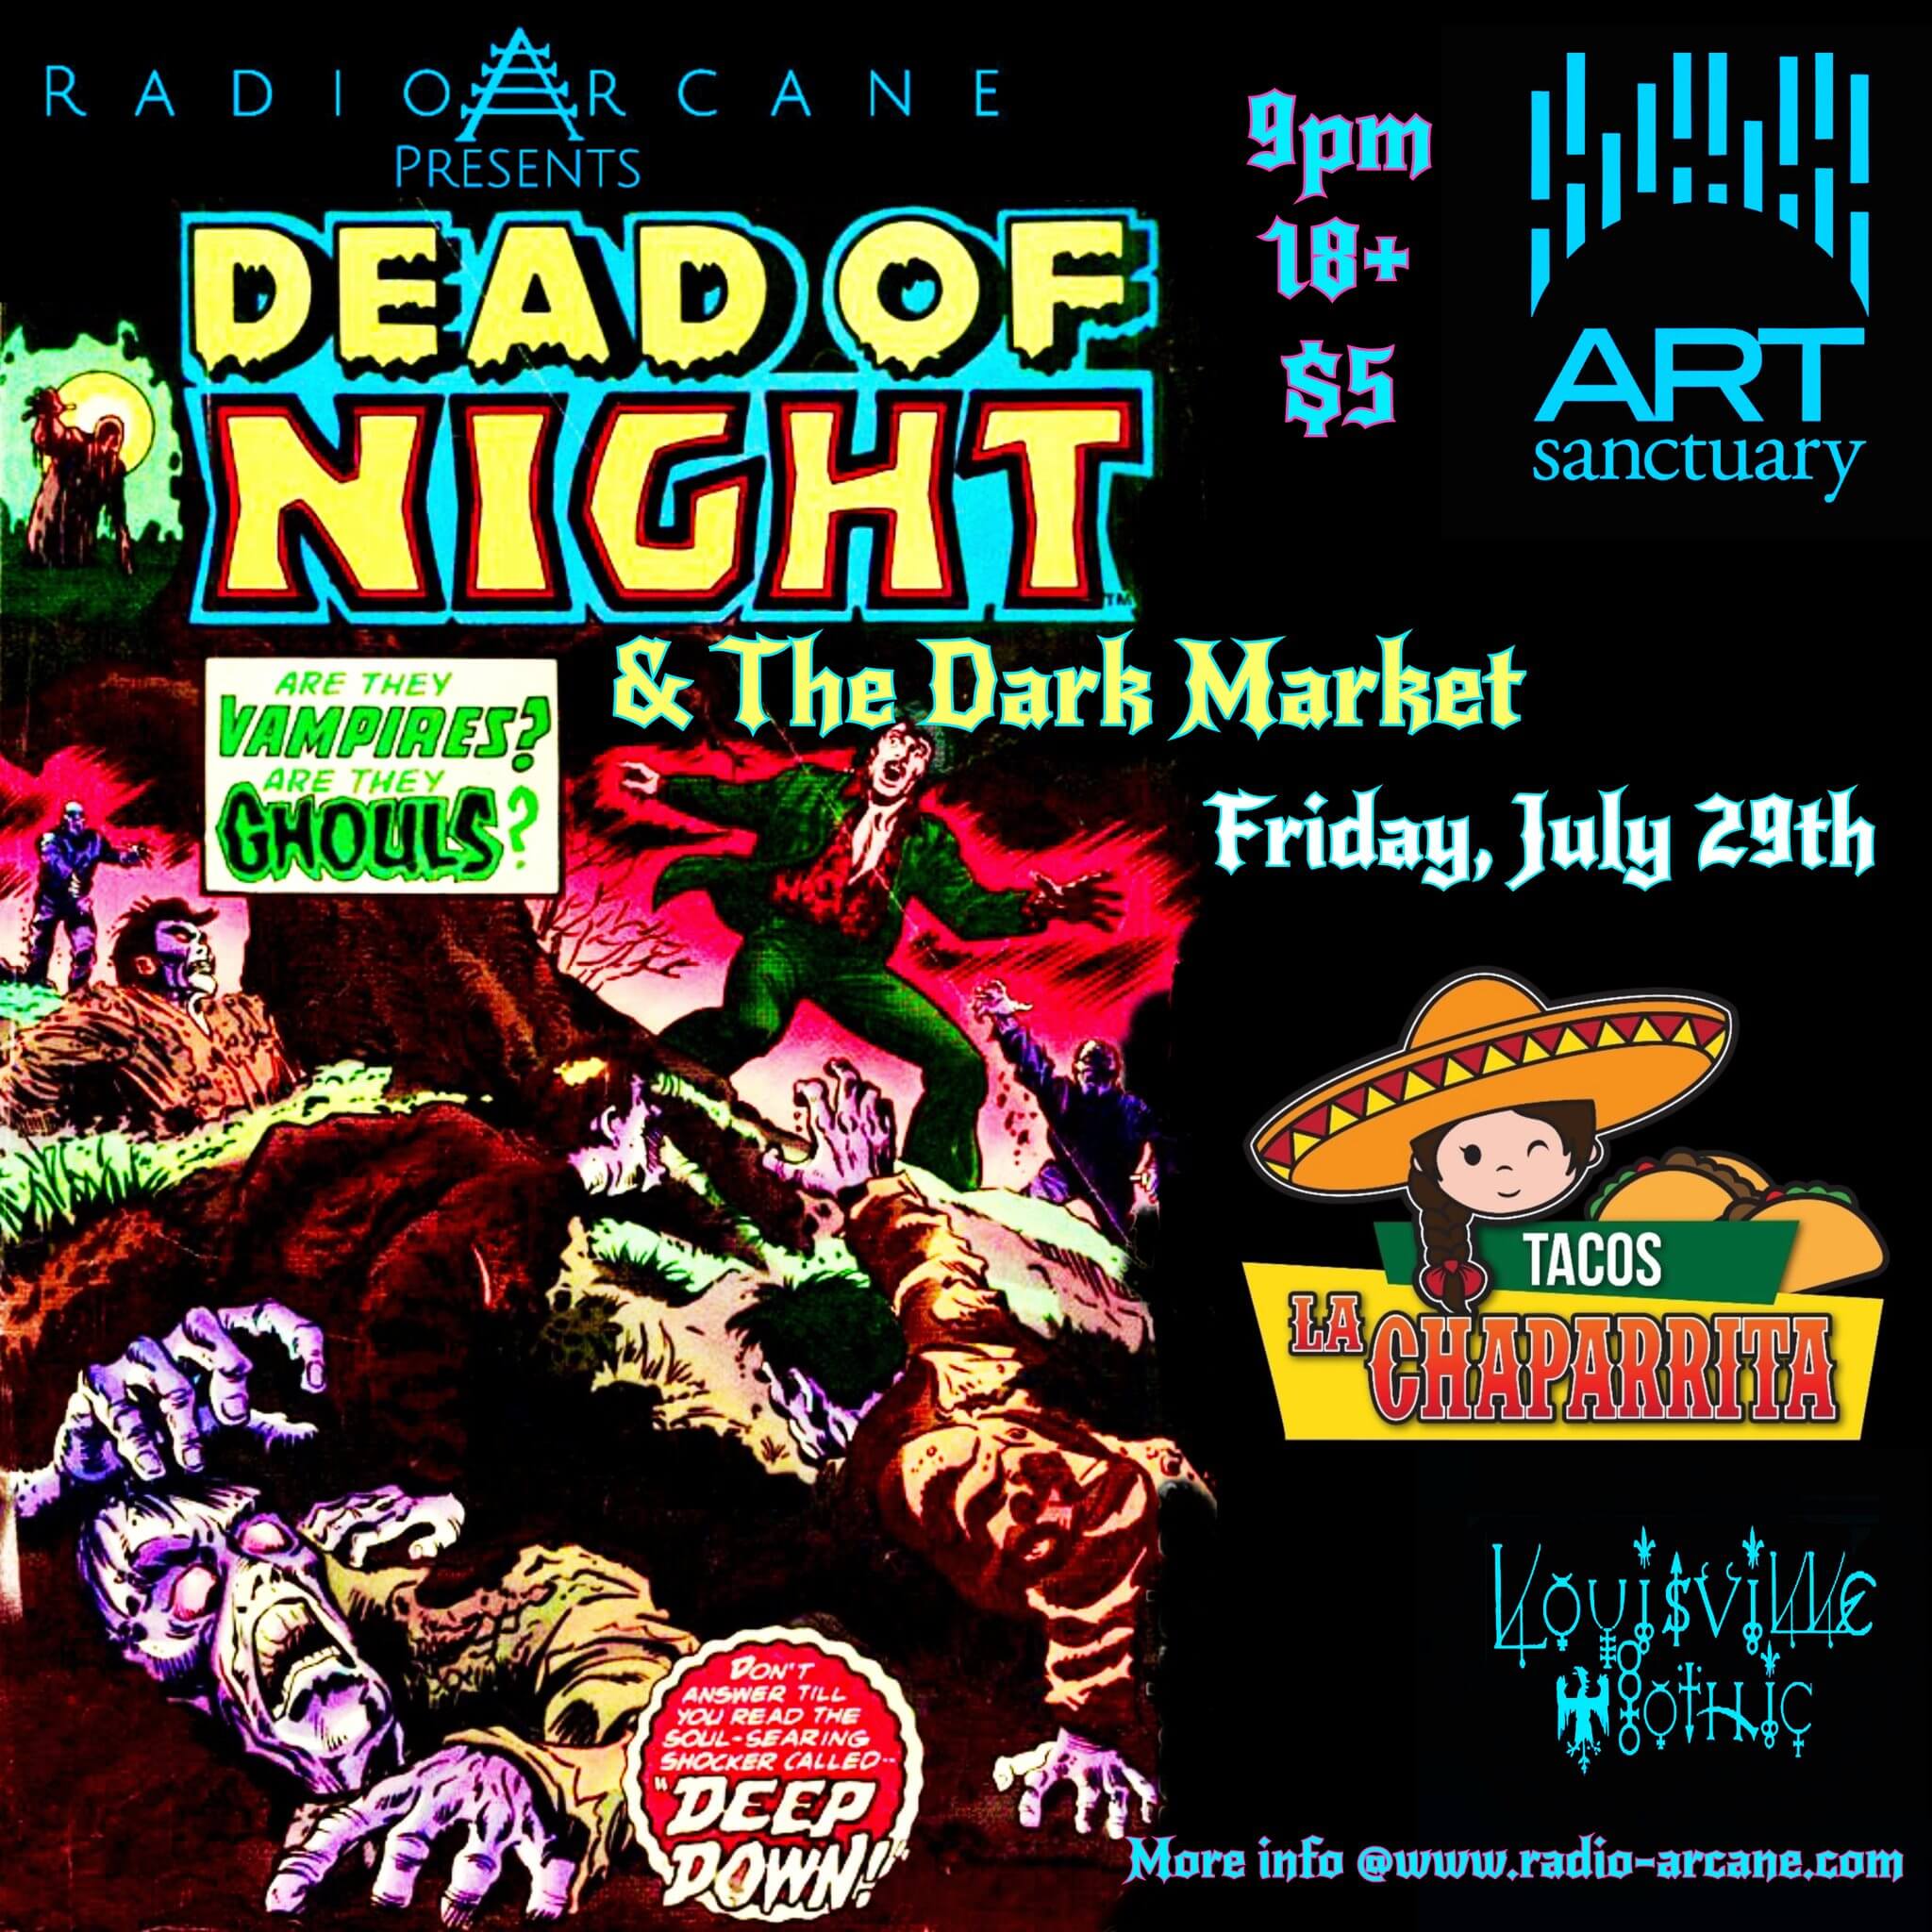 Dead Of Night & The Dark Market "Are They Vampires? Are They Ghouls?"